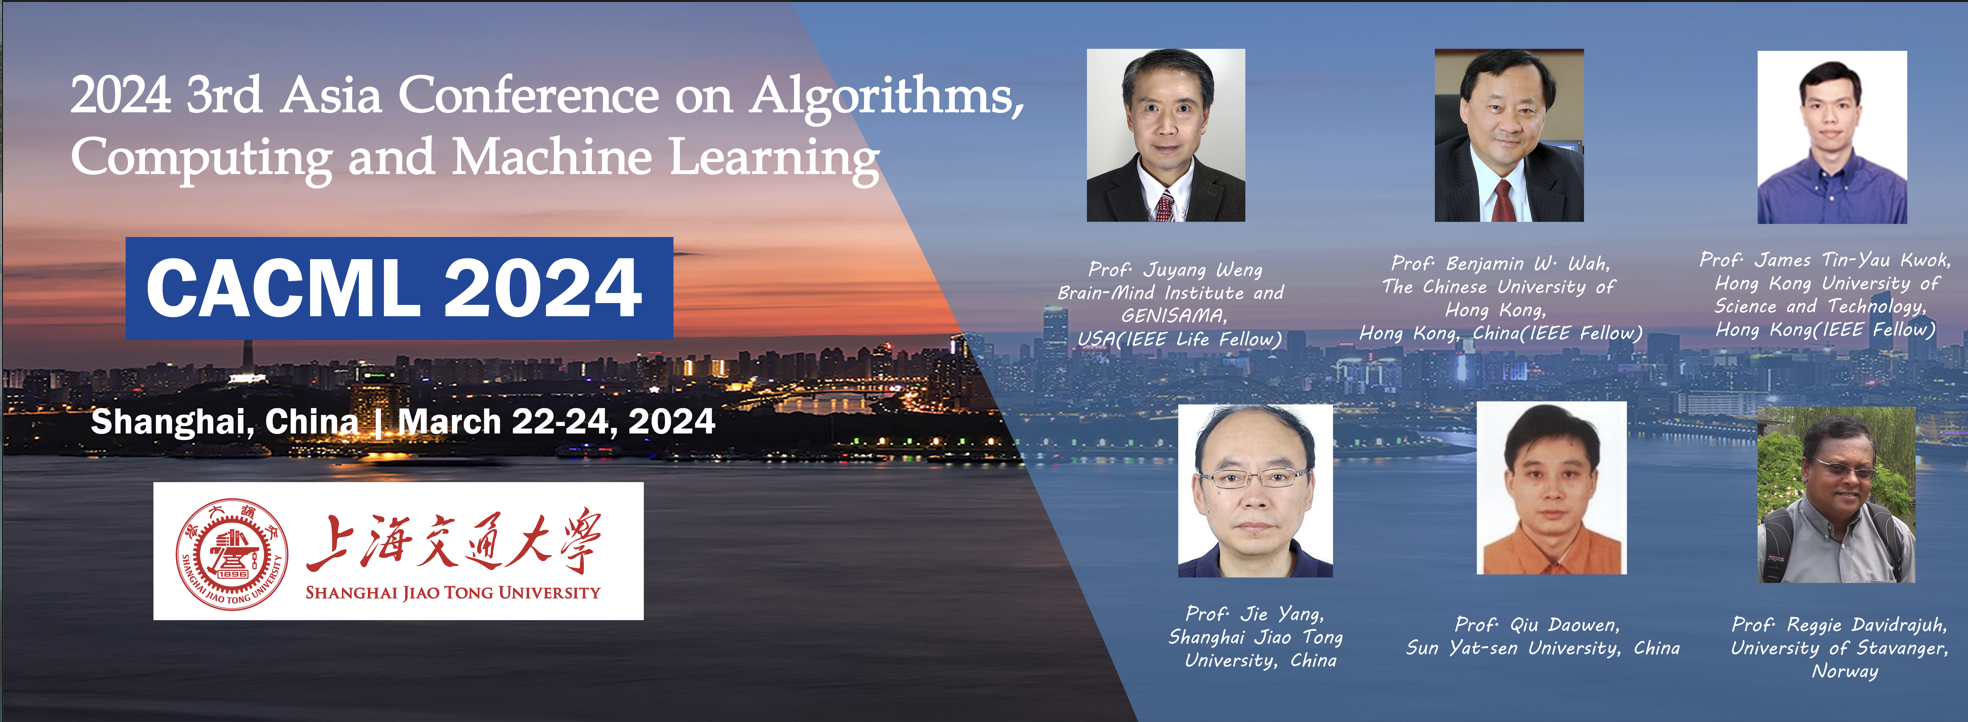 2024 3rd Asia Conference on Algorithms, Computing and Machine Learning (CACML 2024), Shanghai, China,Shanghai,China